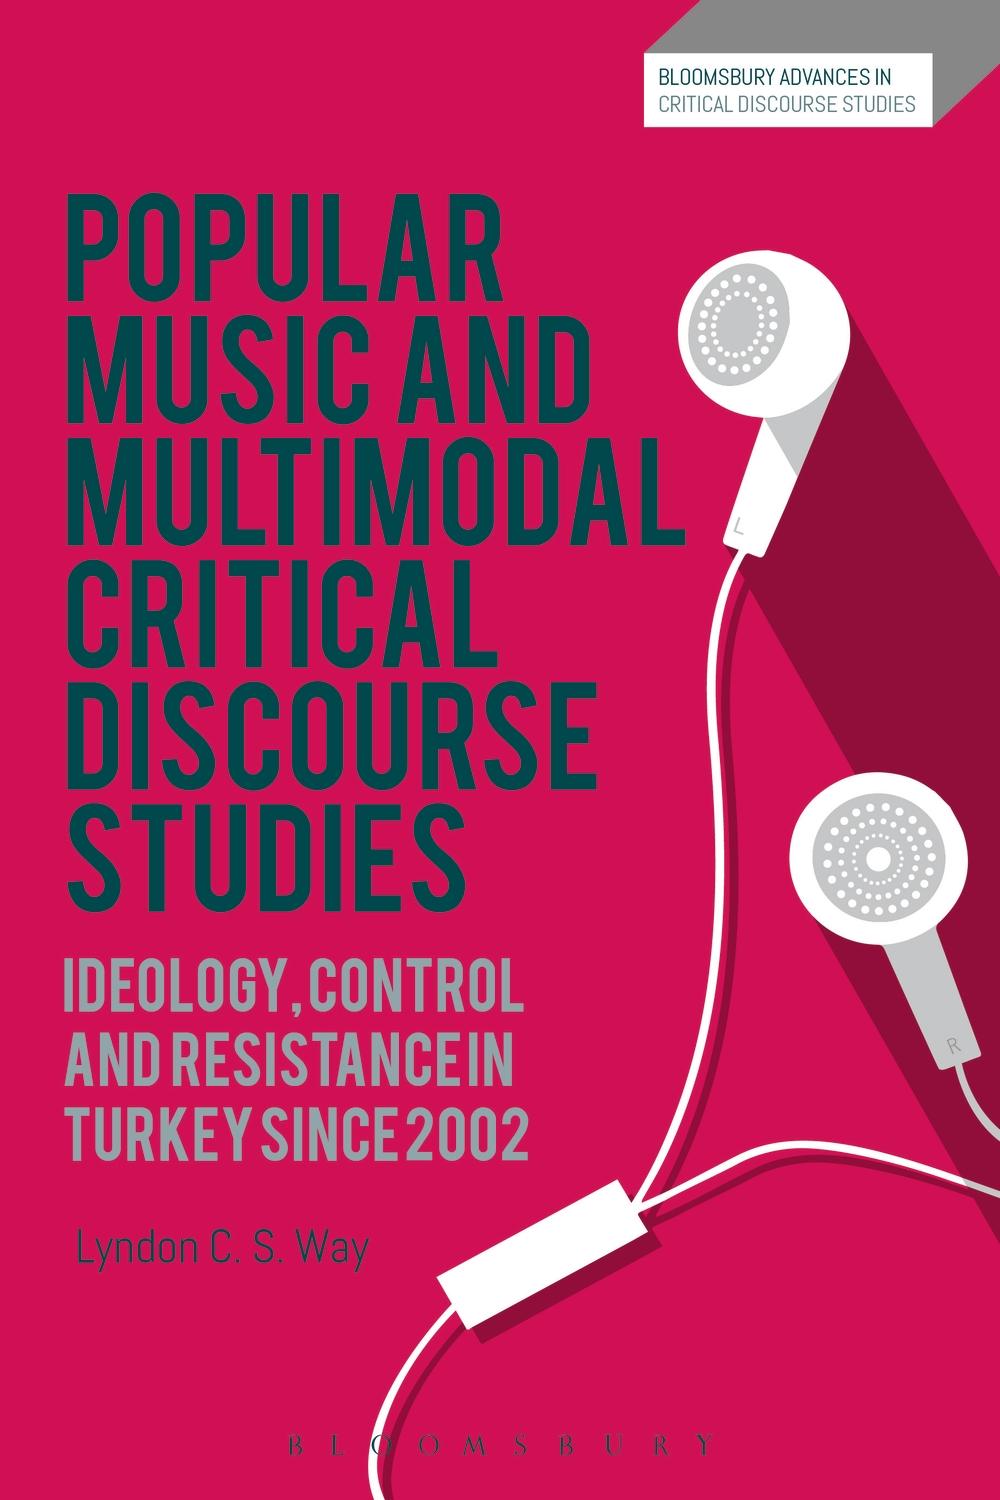 Popular Music and Multimodal Critical Discourse Studies - Lyndon C S Way